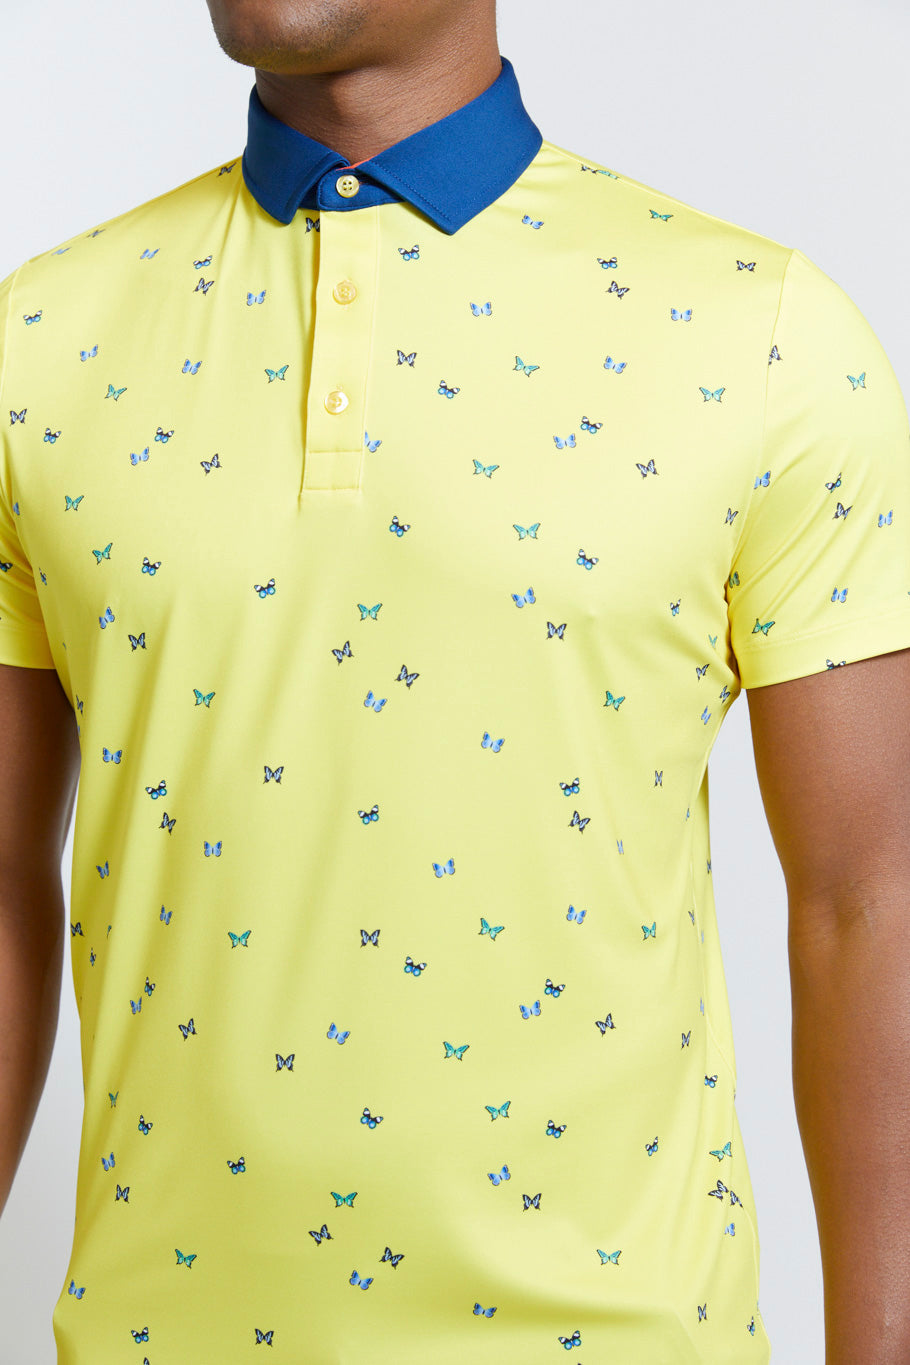 Image of the fullerton polo in sun ss23